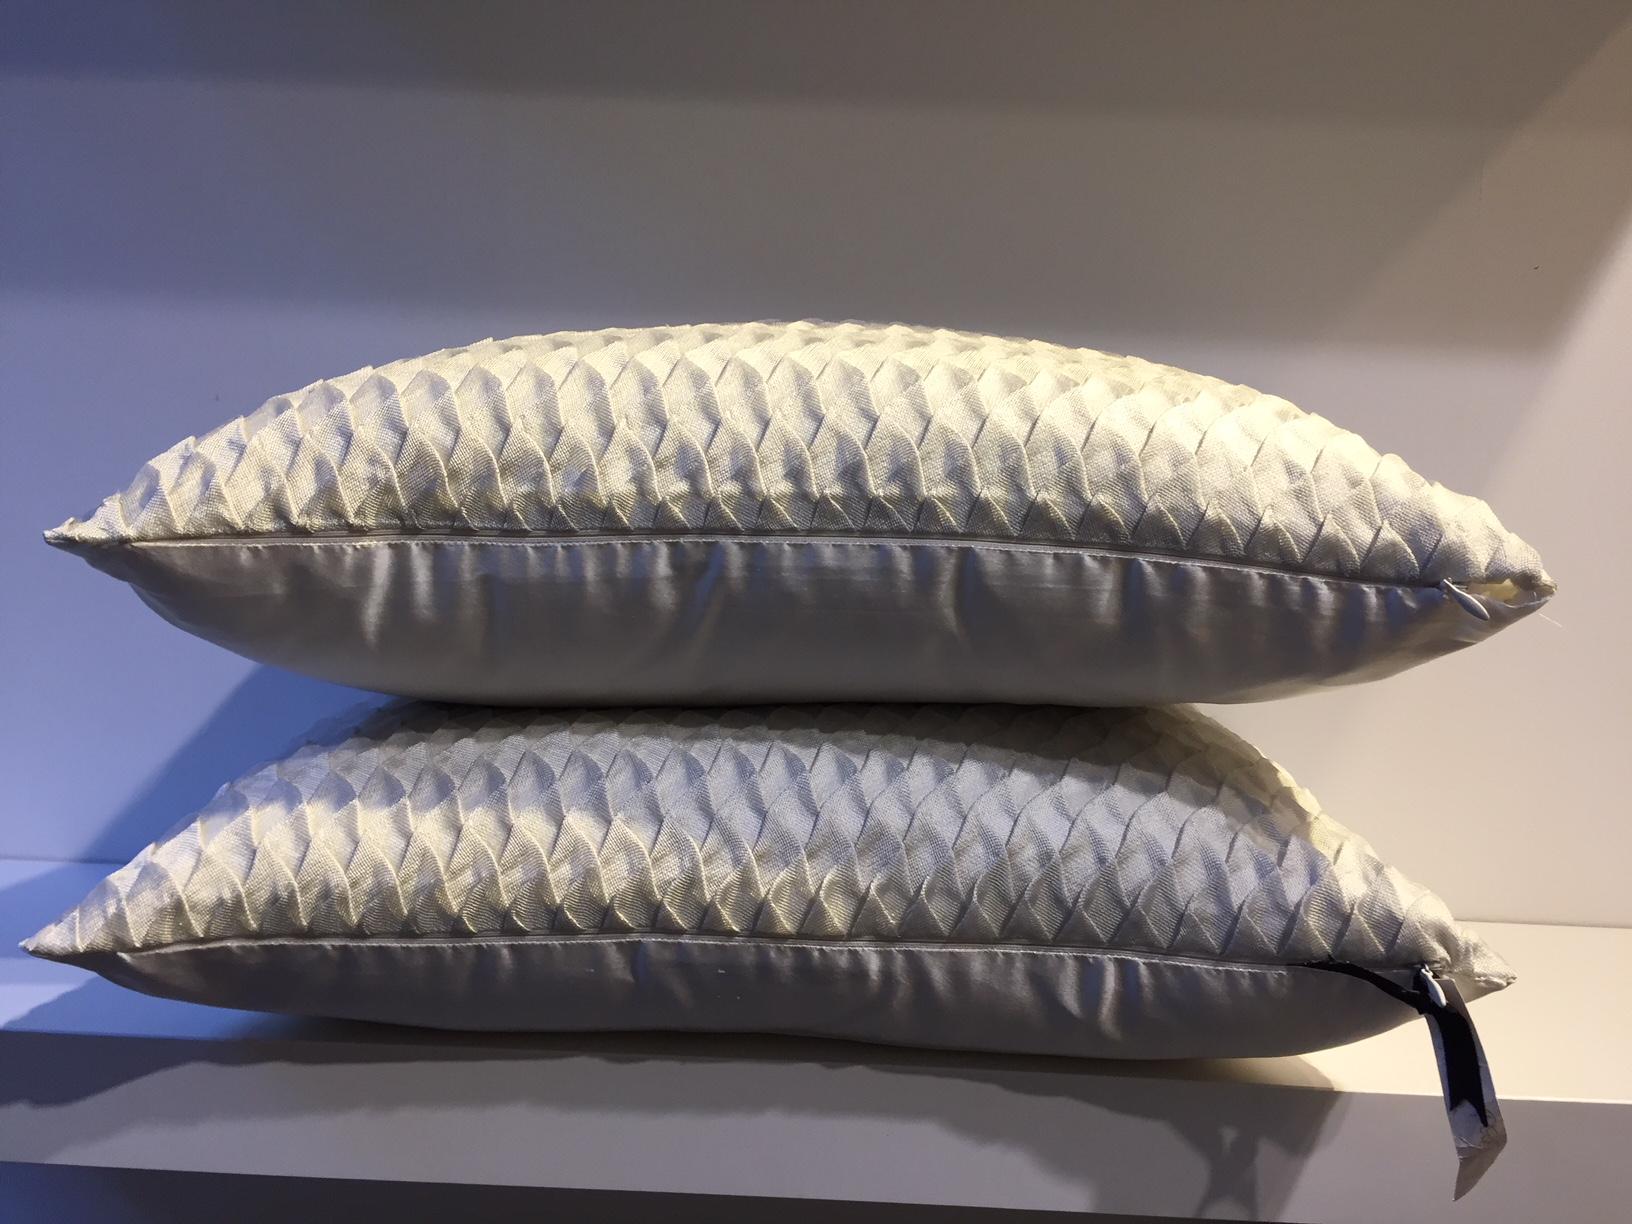 One pair silk cushions with embossed front panel in steam pleated silk mesh, fish scale pattern, back panel plain silk, handwoven silk taffeta col. Oyster, size 35 x 50cm,
cushion cover with cotton lining, concealed zipper in the bottom